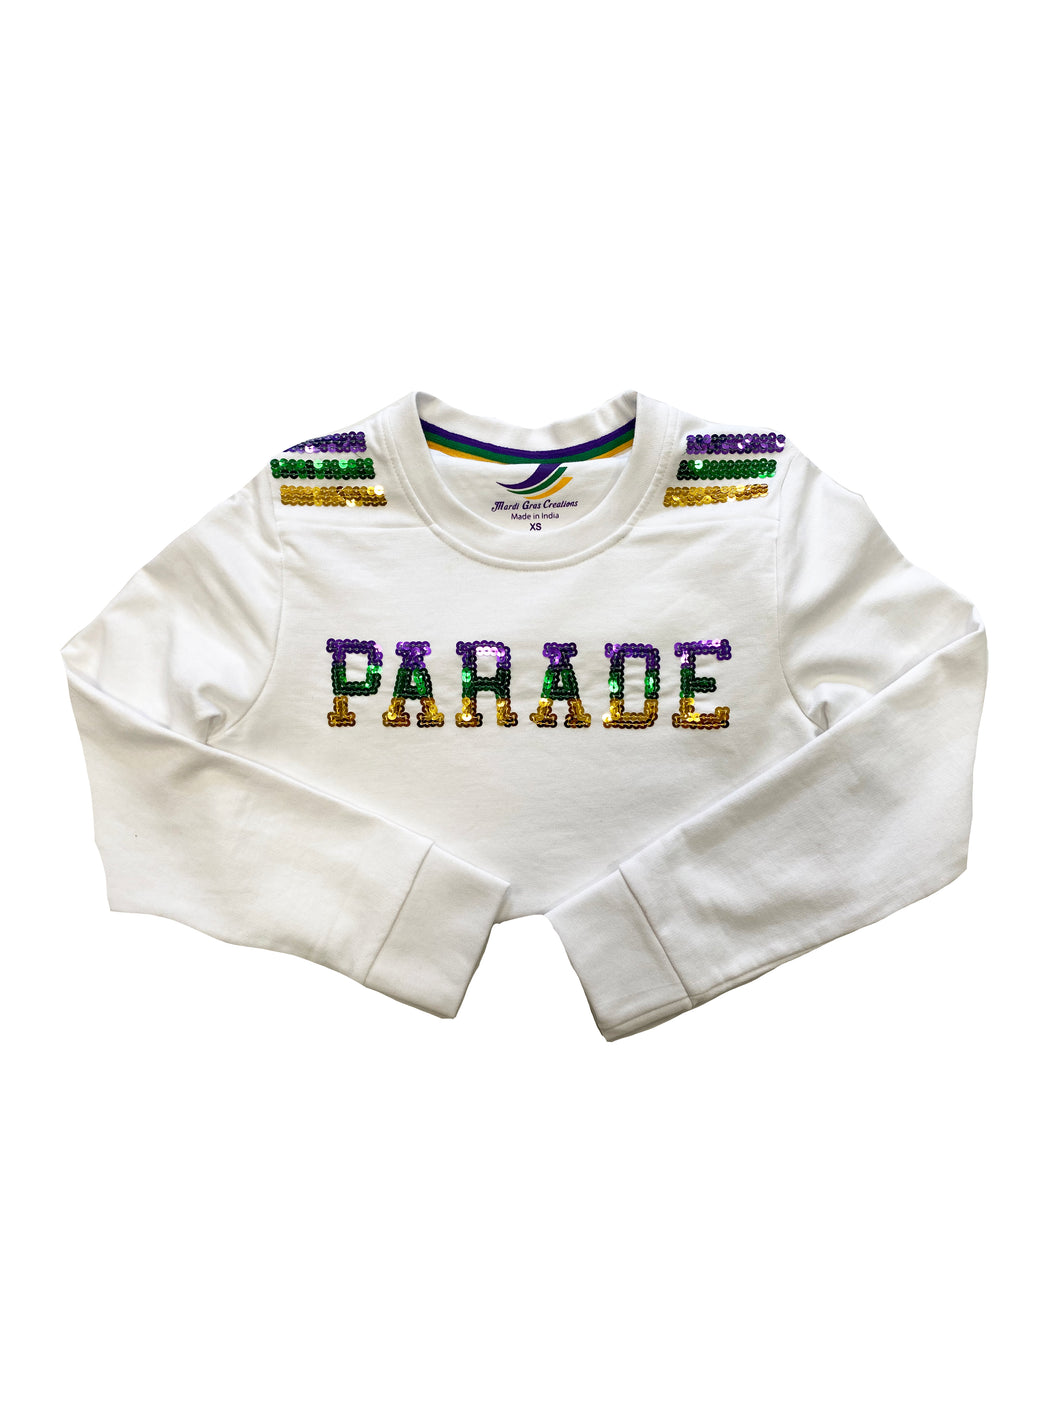 French Terry Kids Sequins PARADE Shirt - White